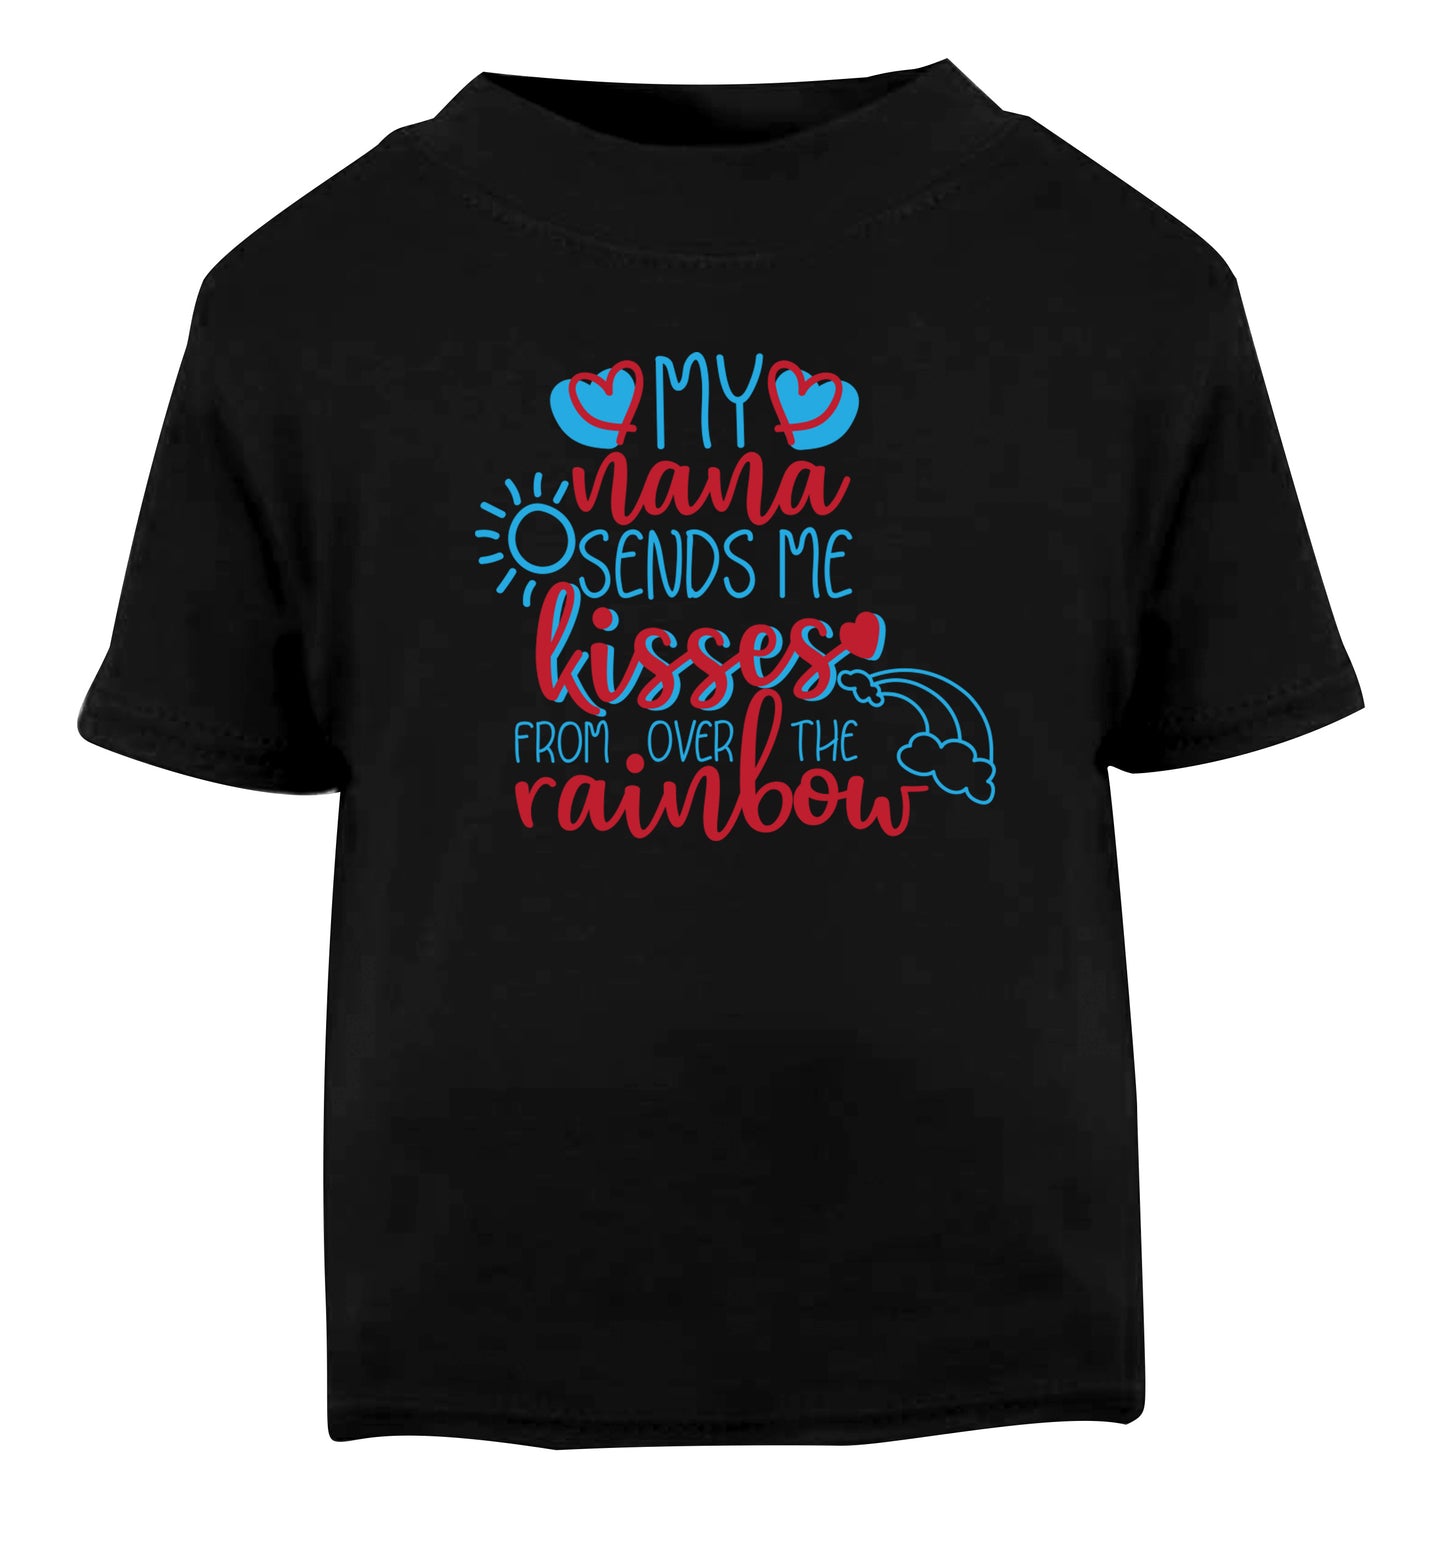 My nana sends me kisses from over the rainbow Black Baby Toddler Tshirt 2 years